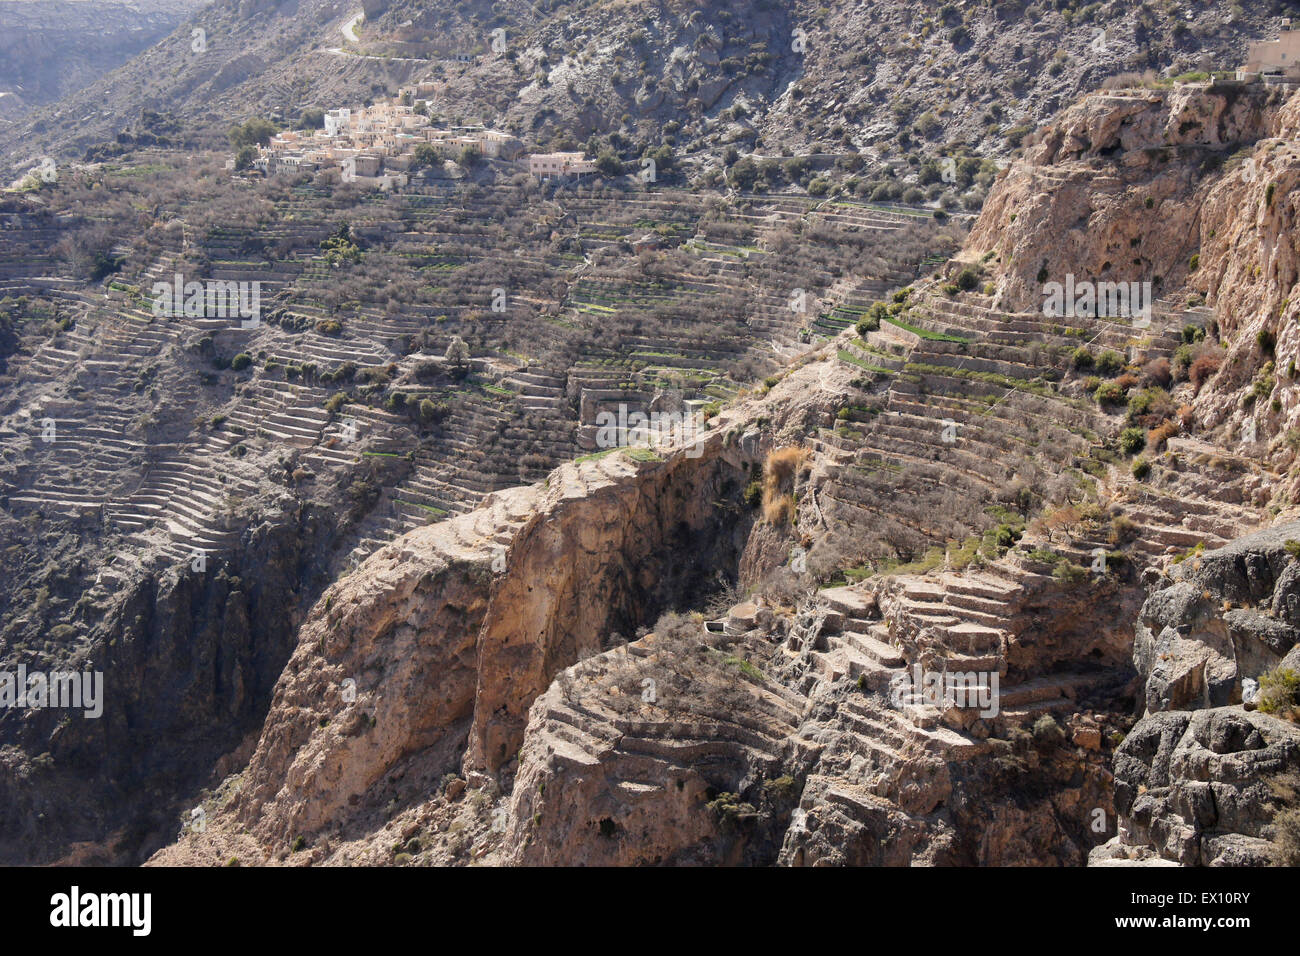 Village and agricultural terraces on Jebel Akhdar, Al Hajar Mountains, Sultanate of Oman Stock Photo